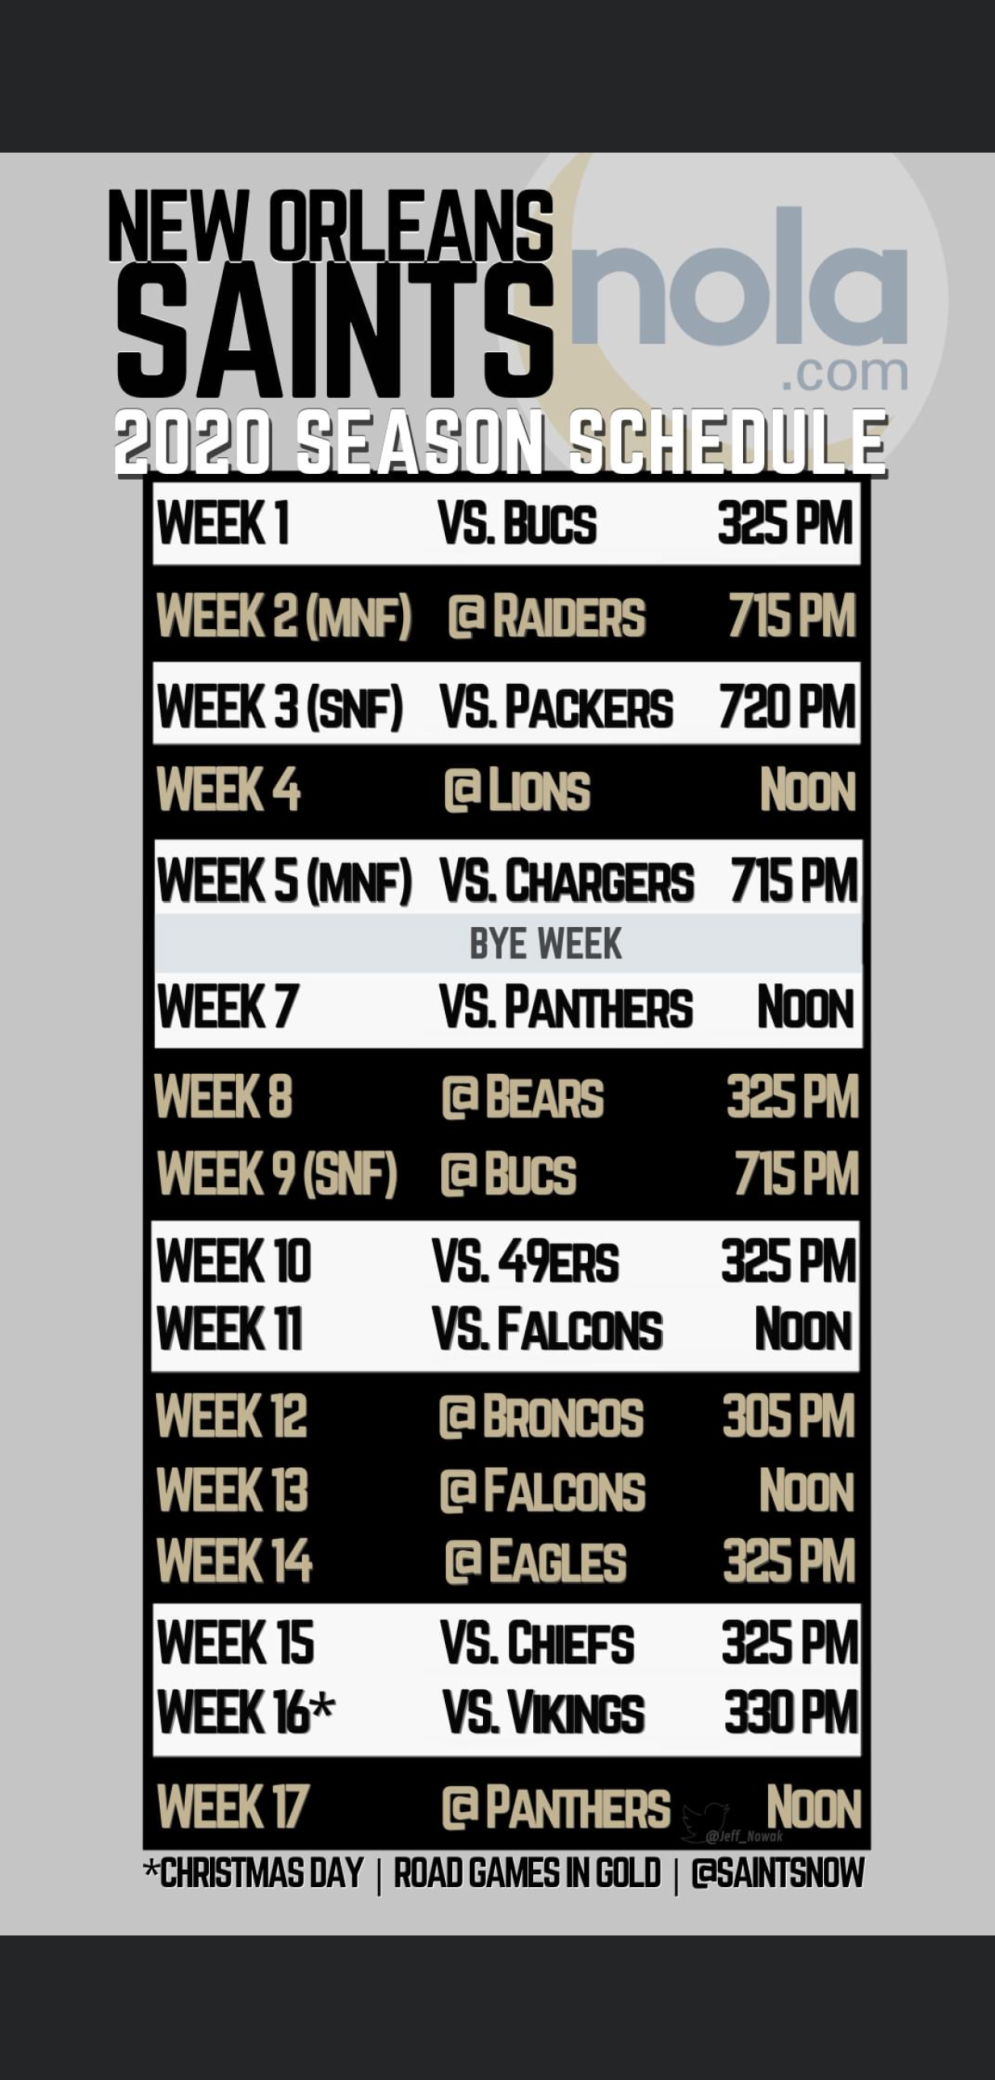 Want Saints 2020 schedule as your phone wallpaper? Click here for image, how-to links | Saints